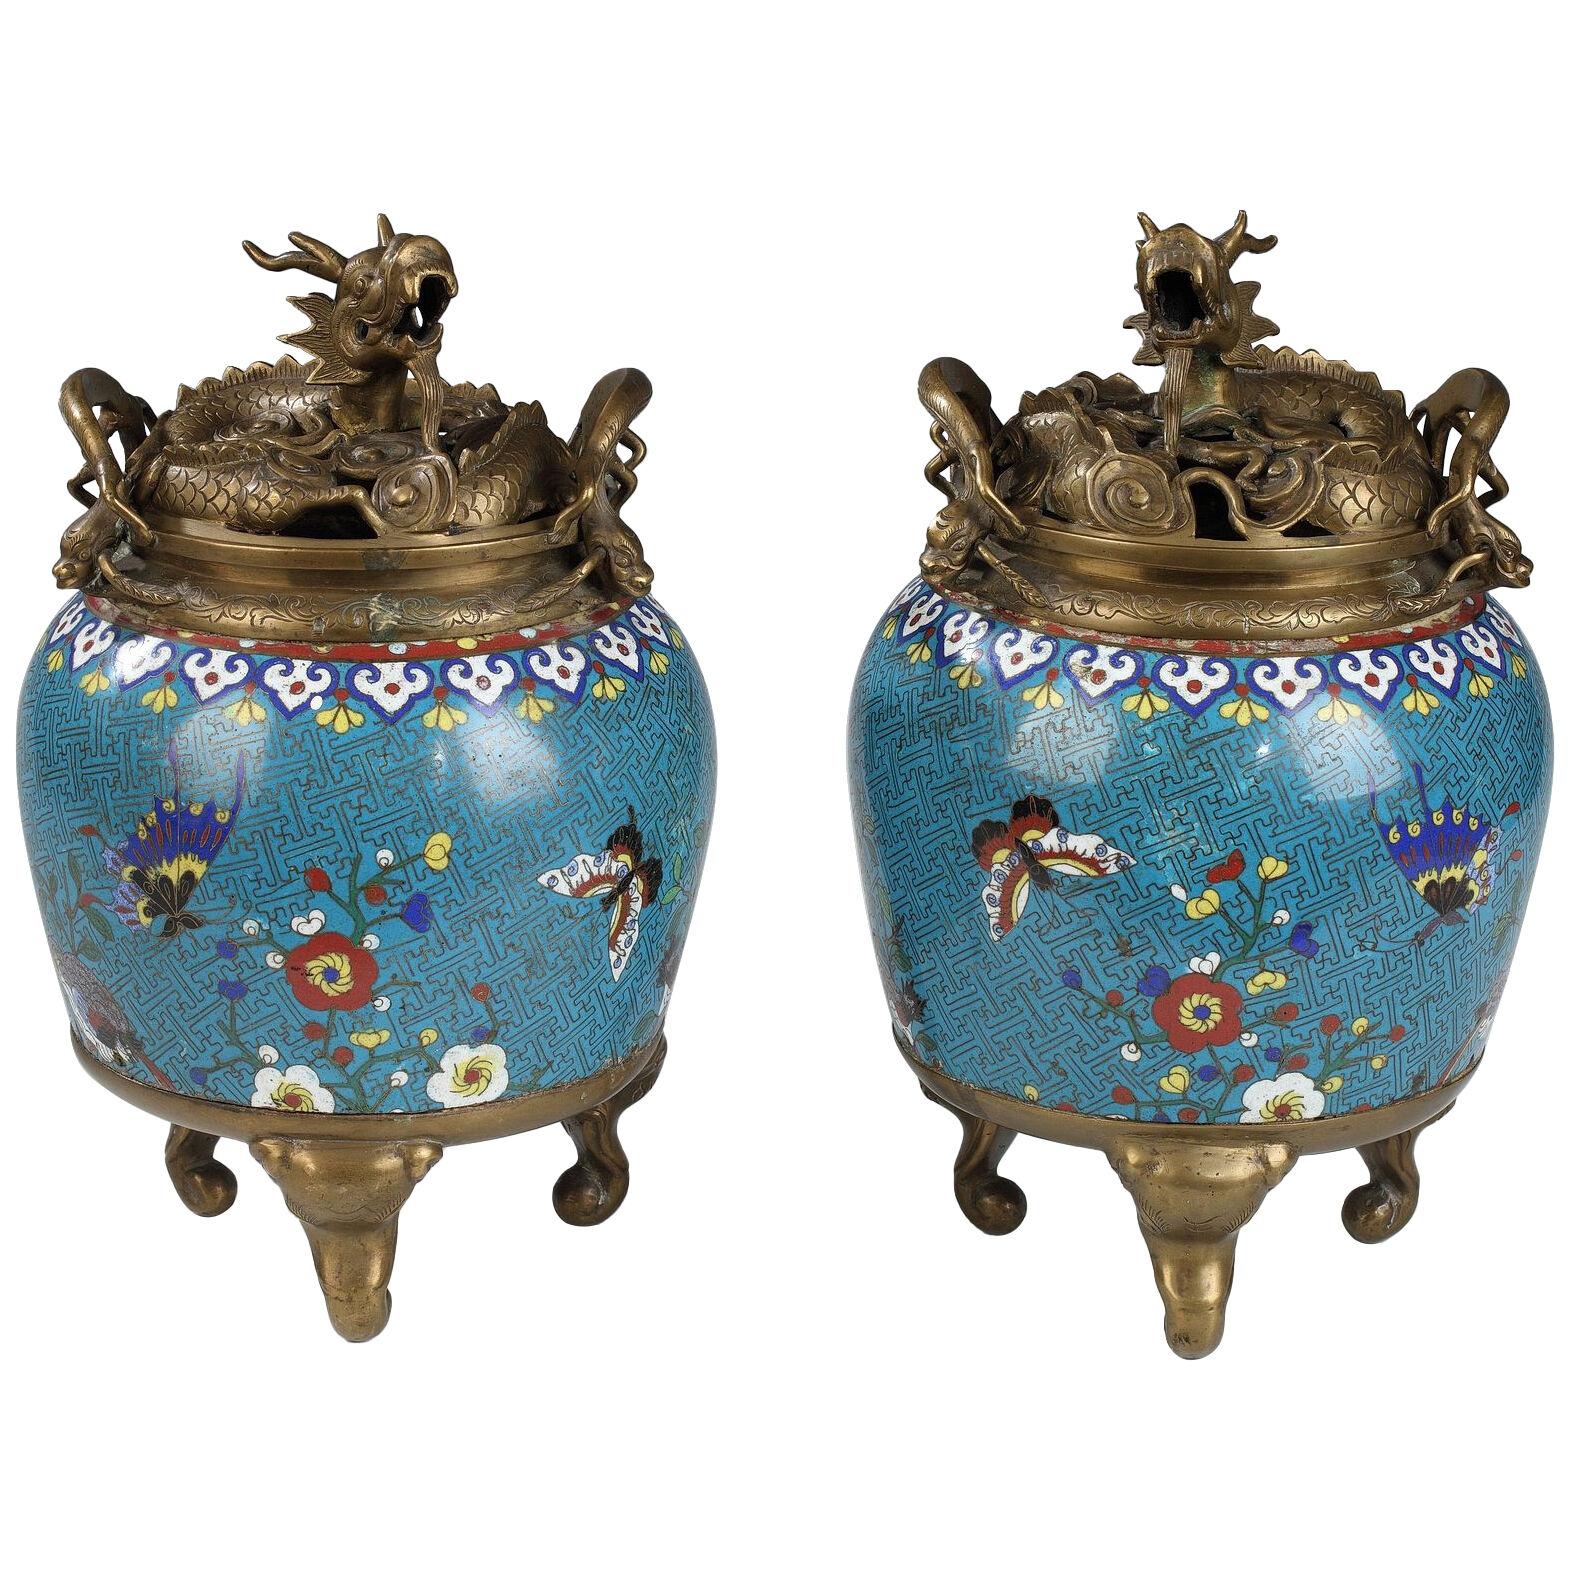 Lovely Chinese Cloisonné Enamel Pair of Jars, China, Early 19th Century